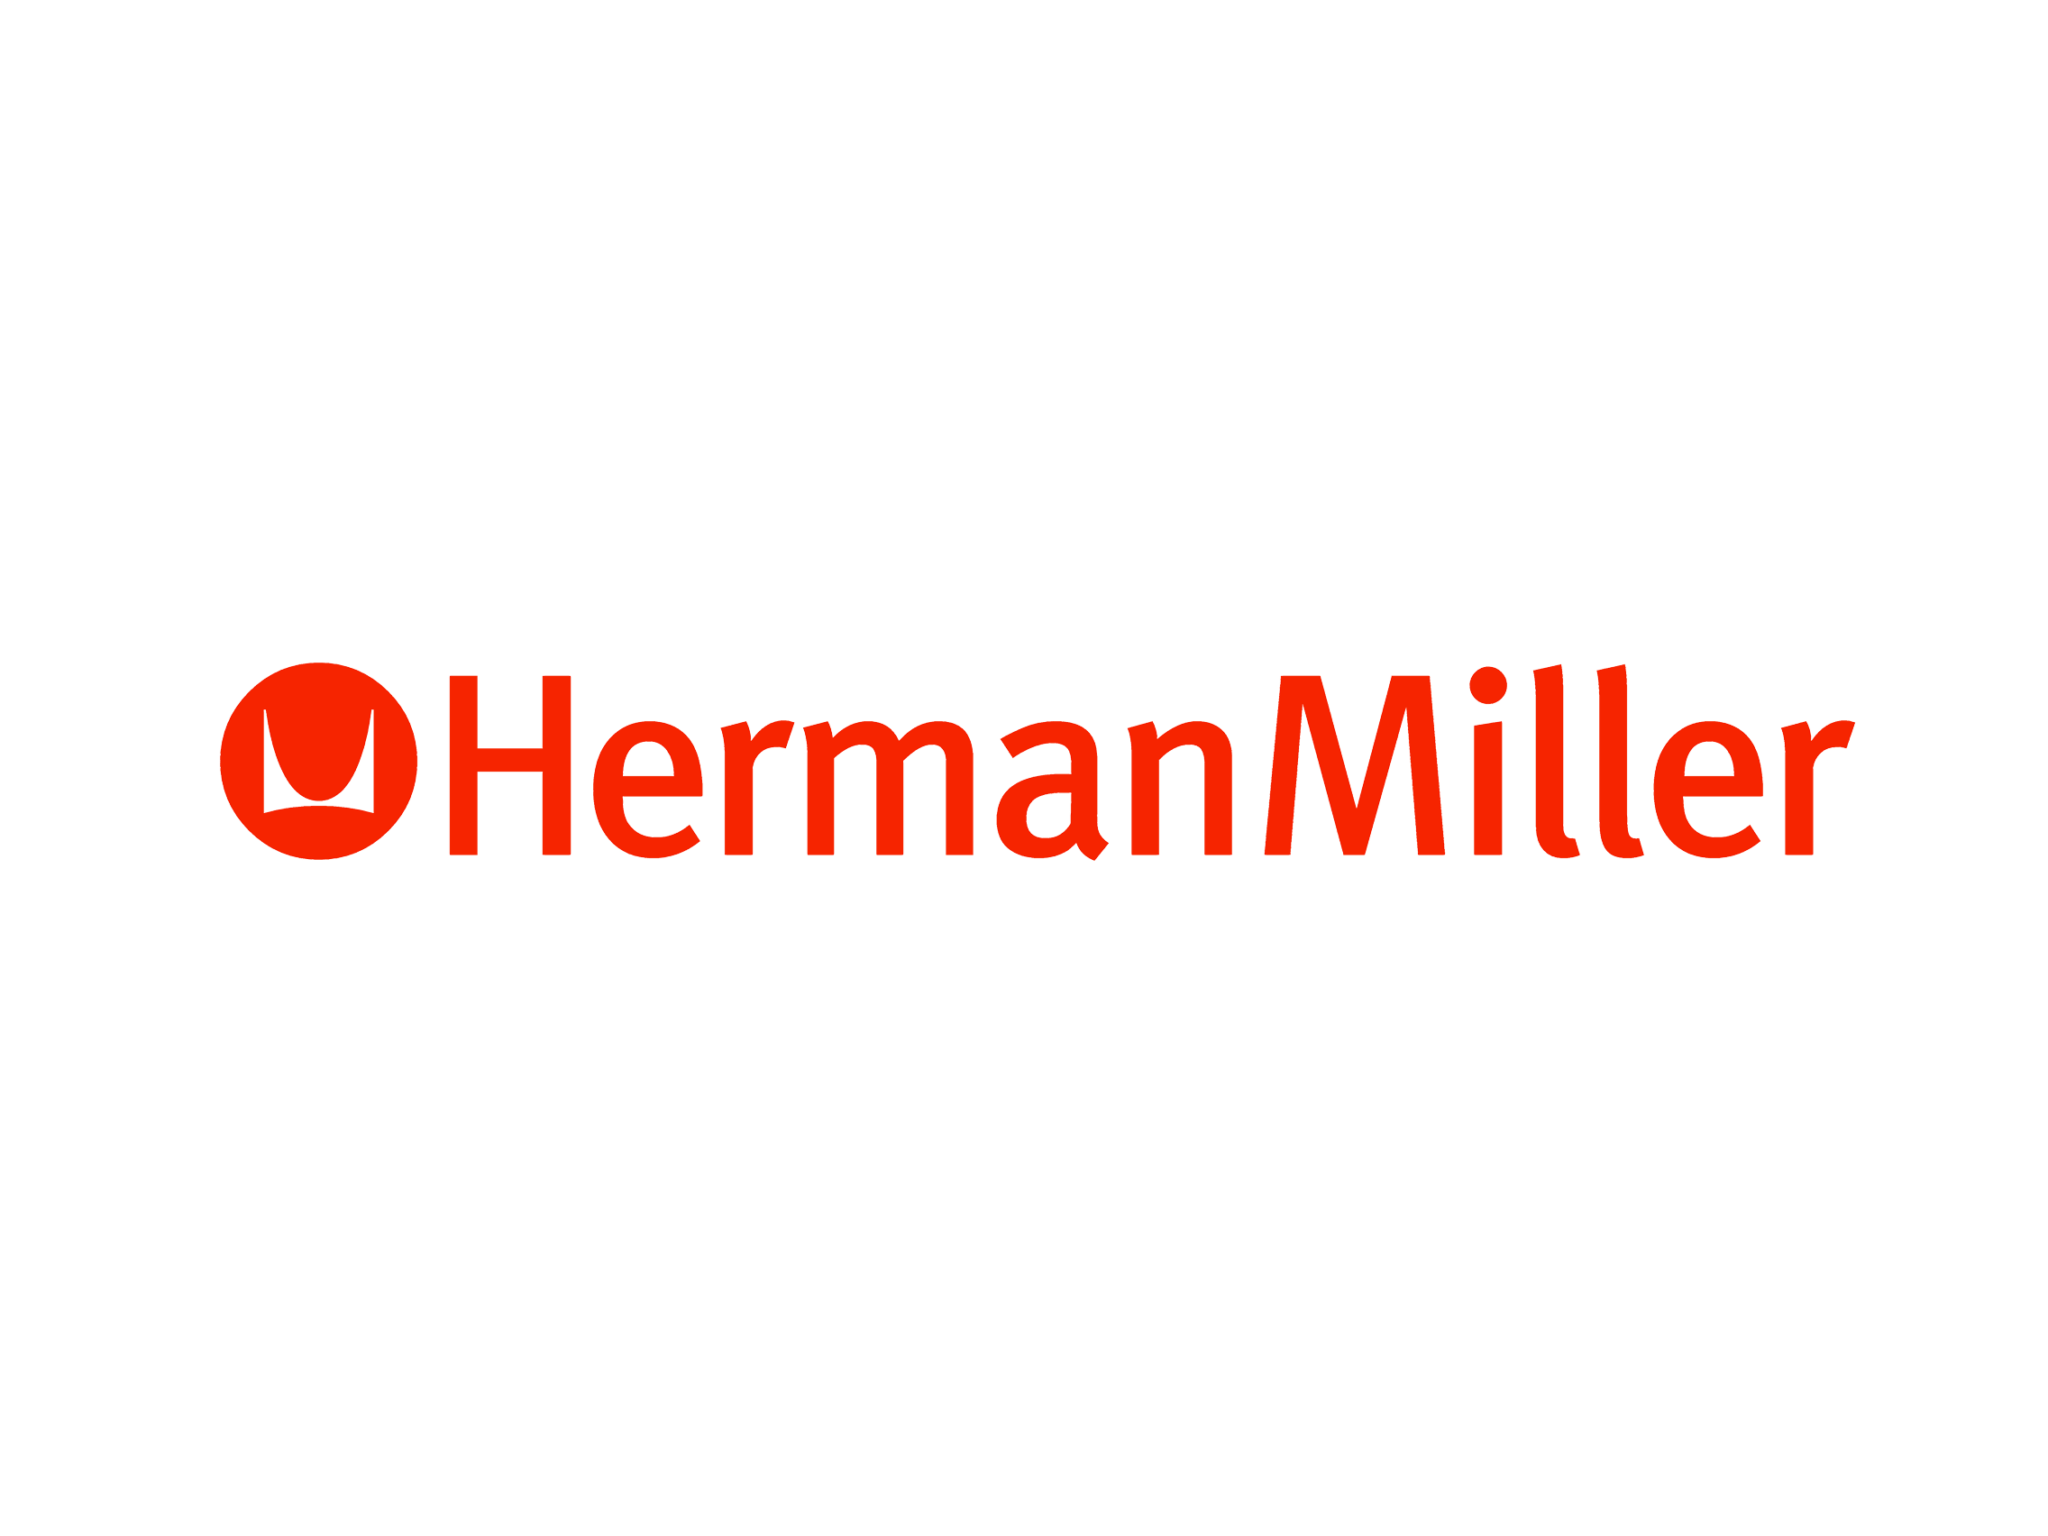 Herman Miller – UX Consulting and Agile Development for Digital IoT Applications